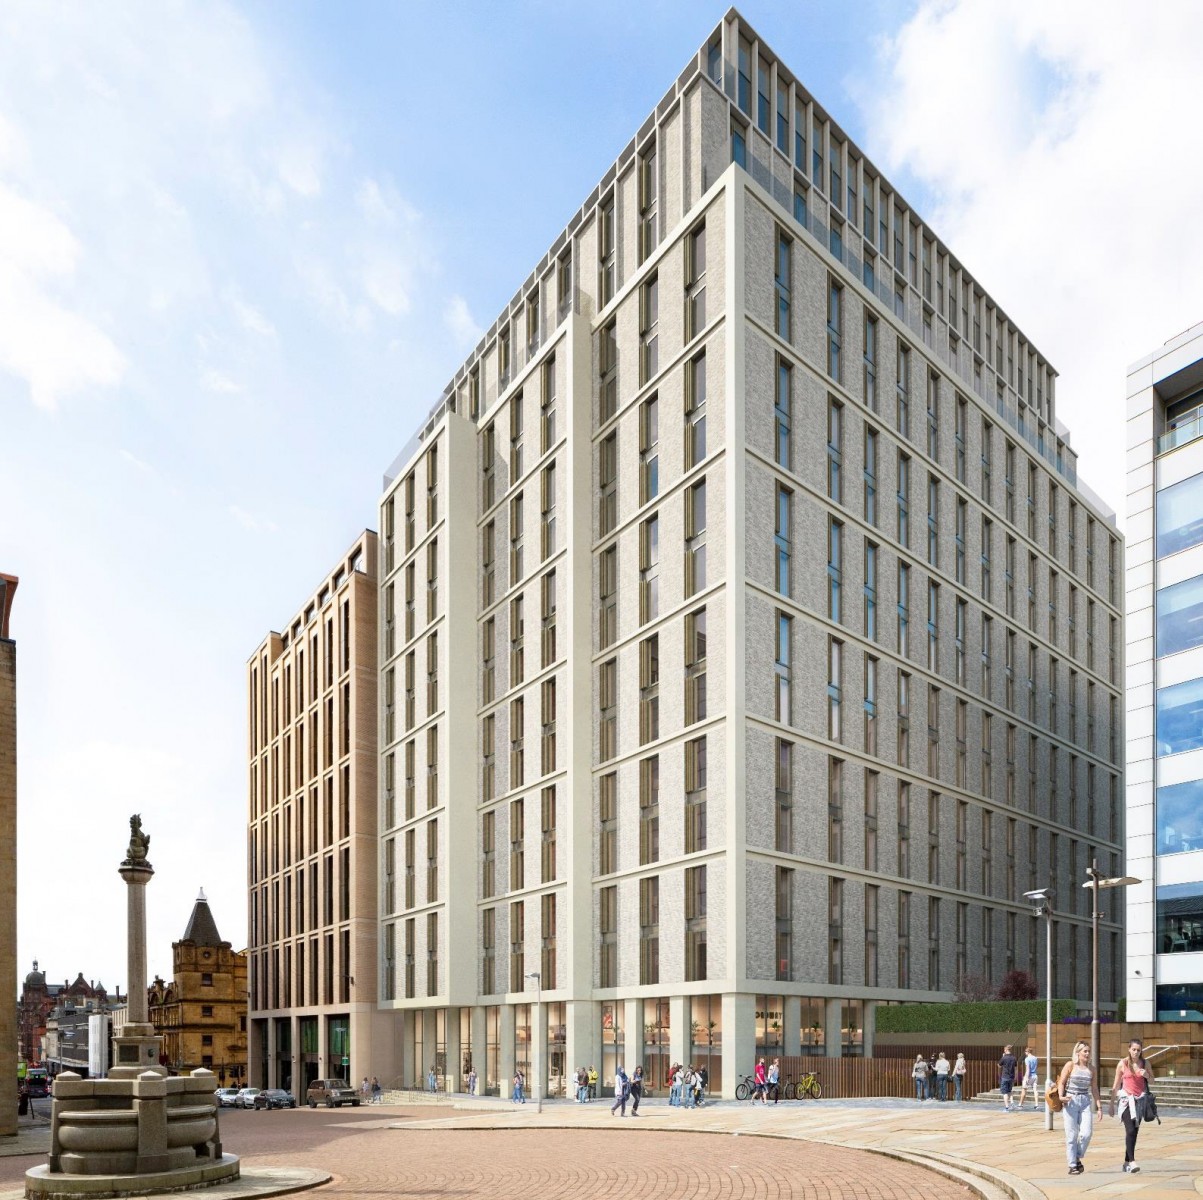 Student accommodation approved at former STV Glasgow site